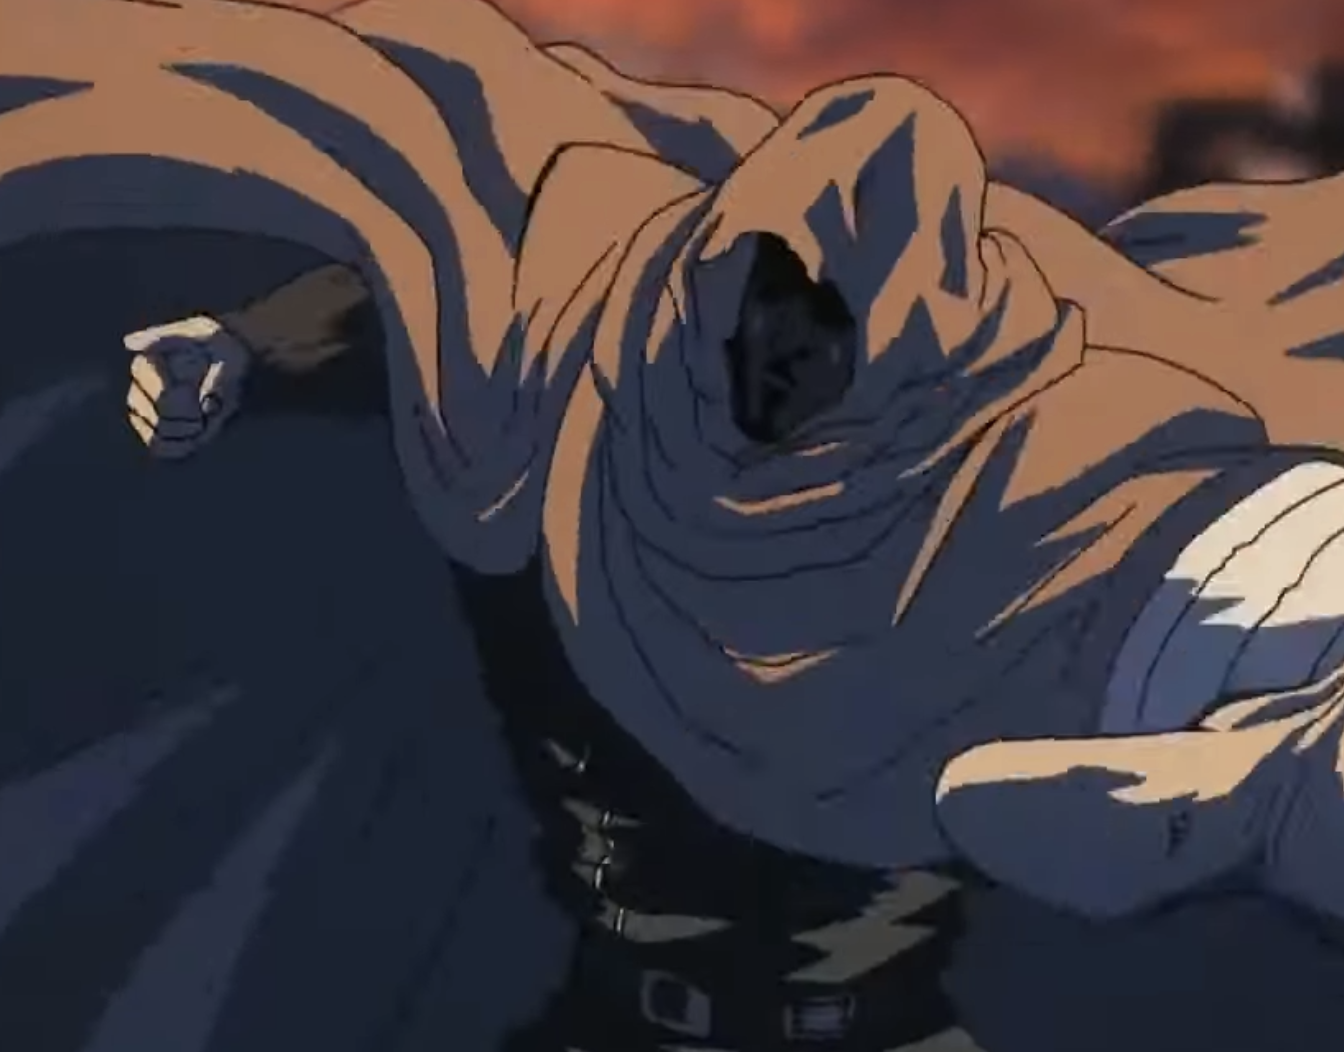 Kenshiro in a cloak about to attack with his index finger